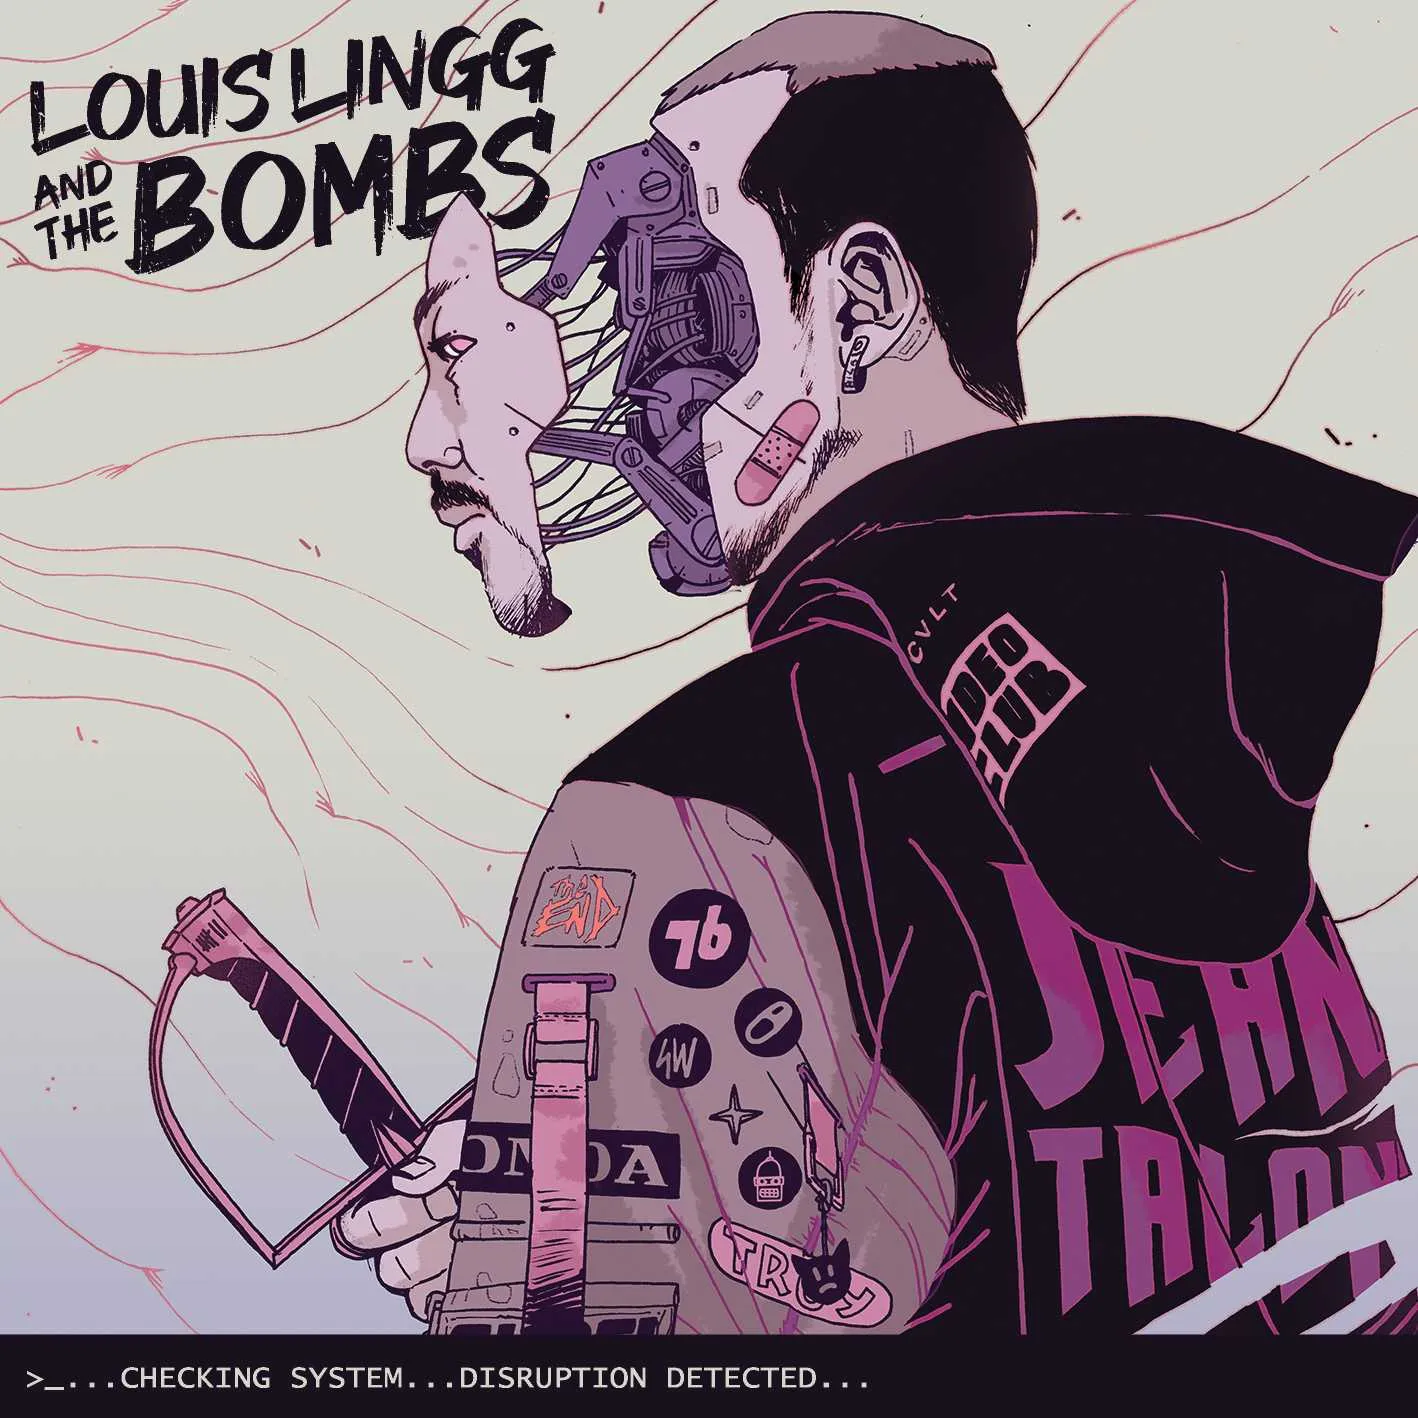 Album cover for “&gt;...checking system... disruption detected...” by Louis Lingg and The Bombs